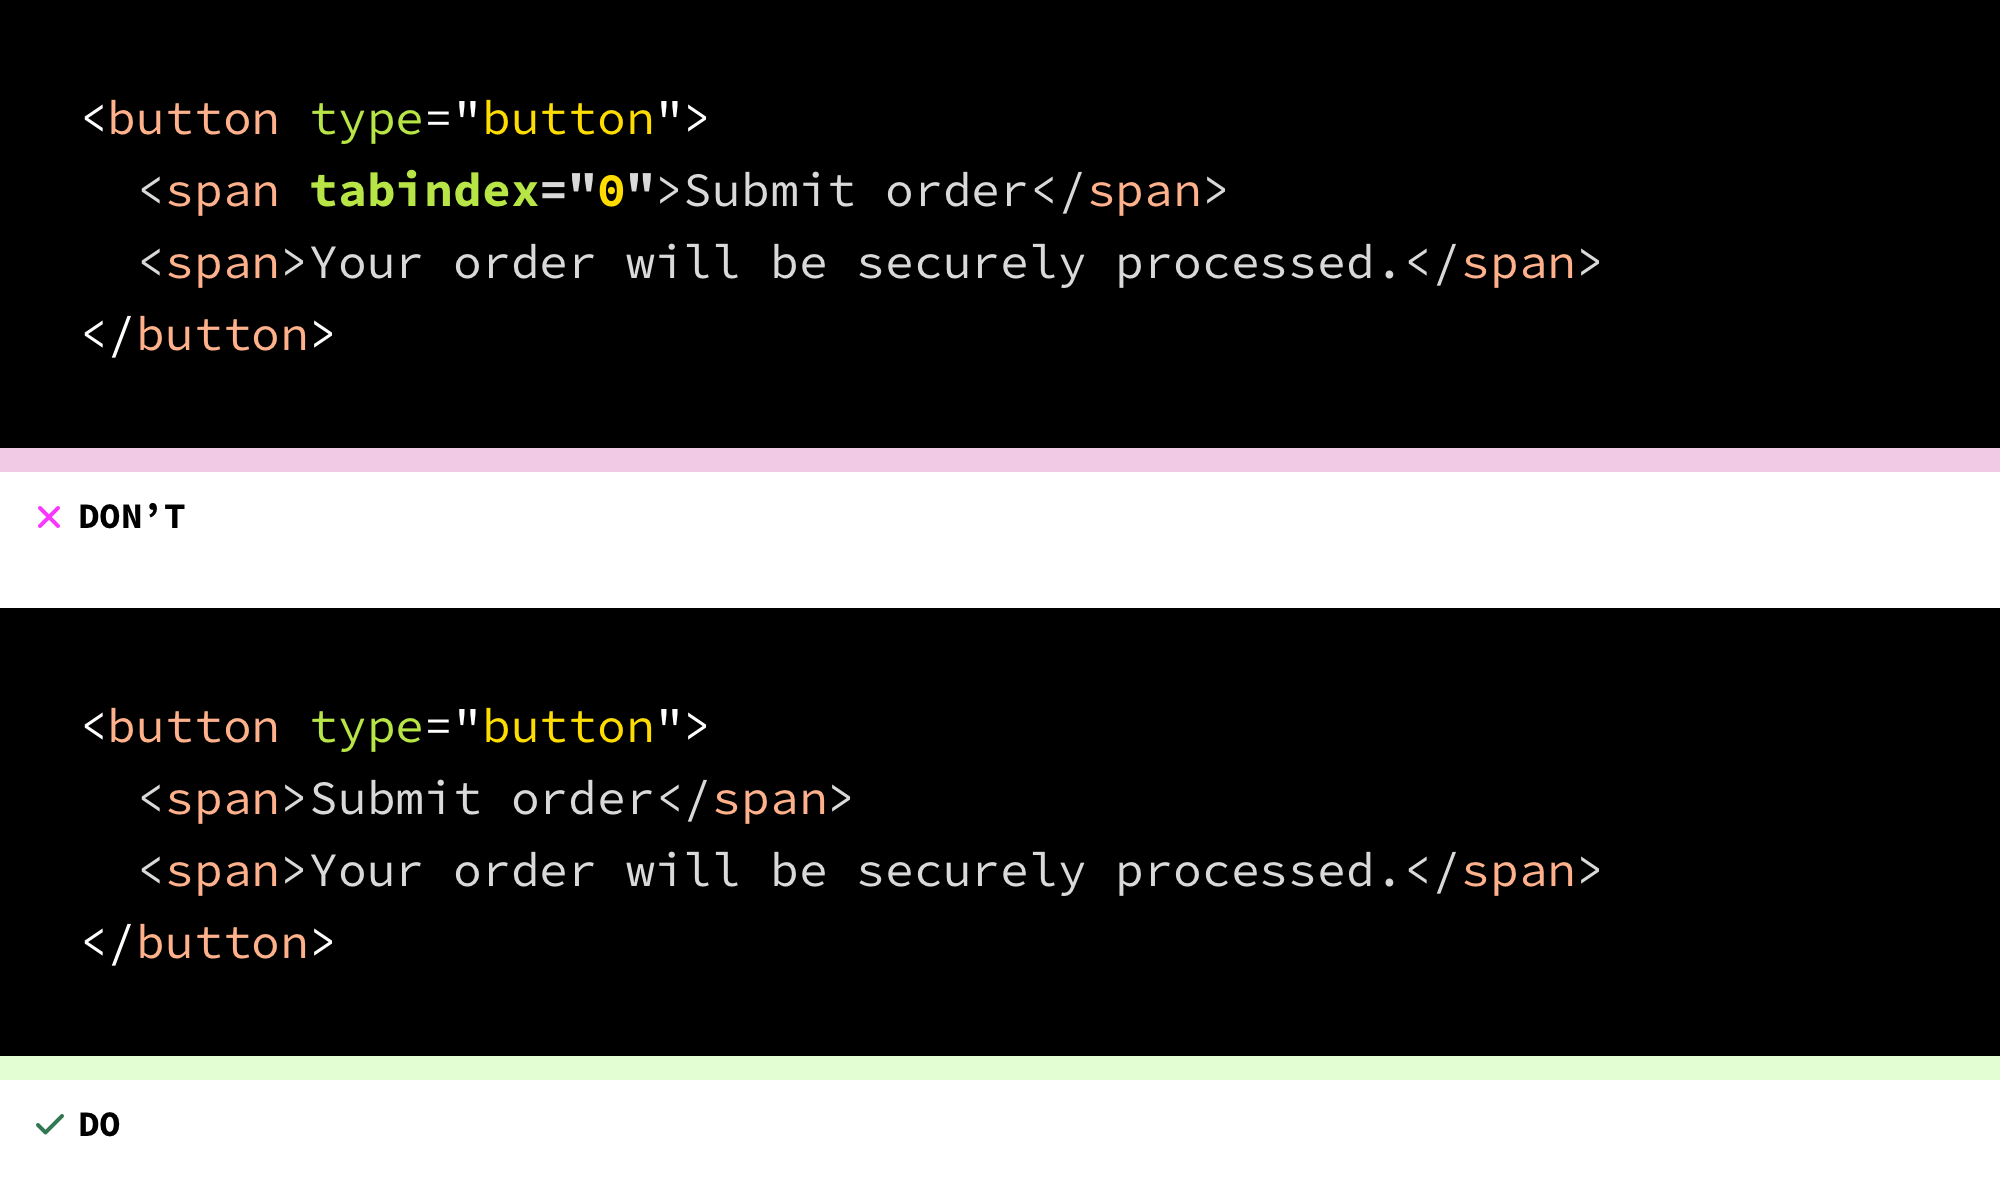 Two code examples, one labeled â€œdon't,â€� the other labeled â€œdo.â€� The example labeled â€œdon'tâ€� shows a button element that contains two span elements. The first span element wraps the text, â€œSubmit orderâ€� and has a declaration of tabindex='0' applied to it. The second span element wraps the text, â€œYour order will be securely processed.â€� The example labeled â€œdoâ€� removes the tabindex declaration.